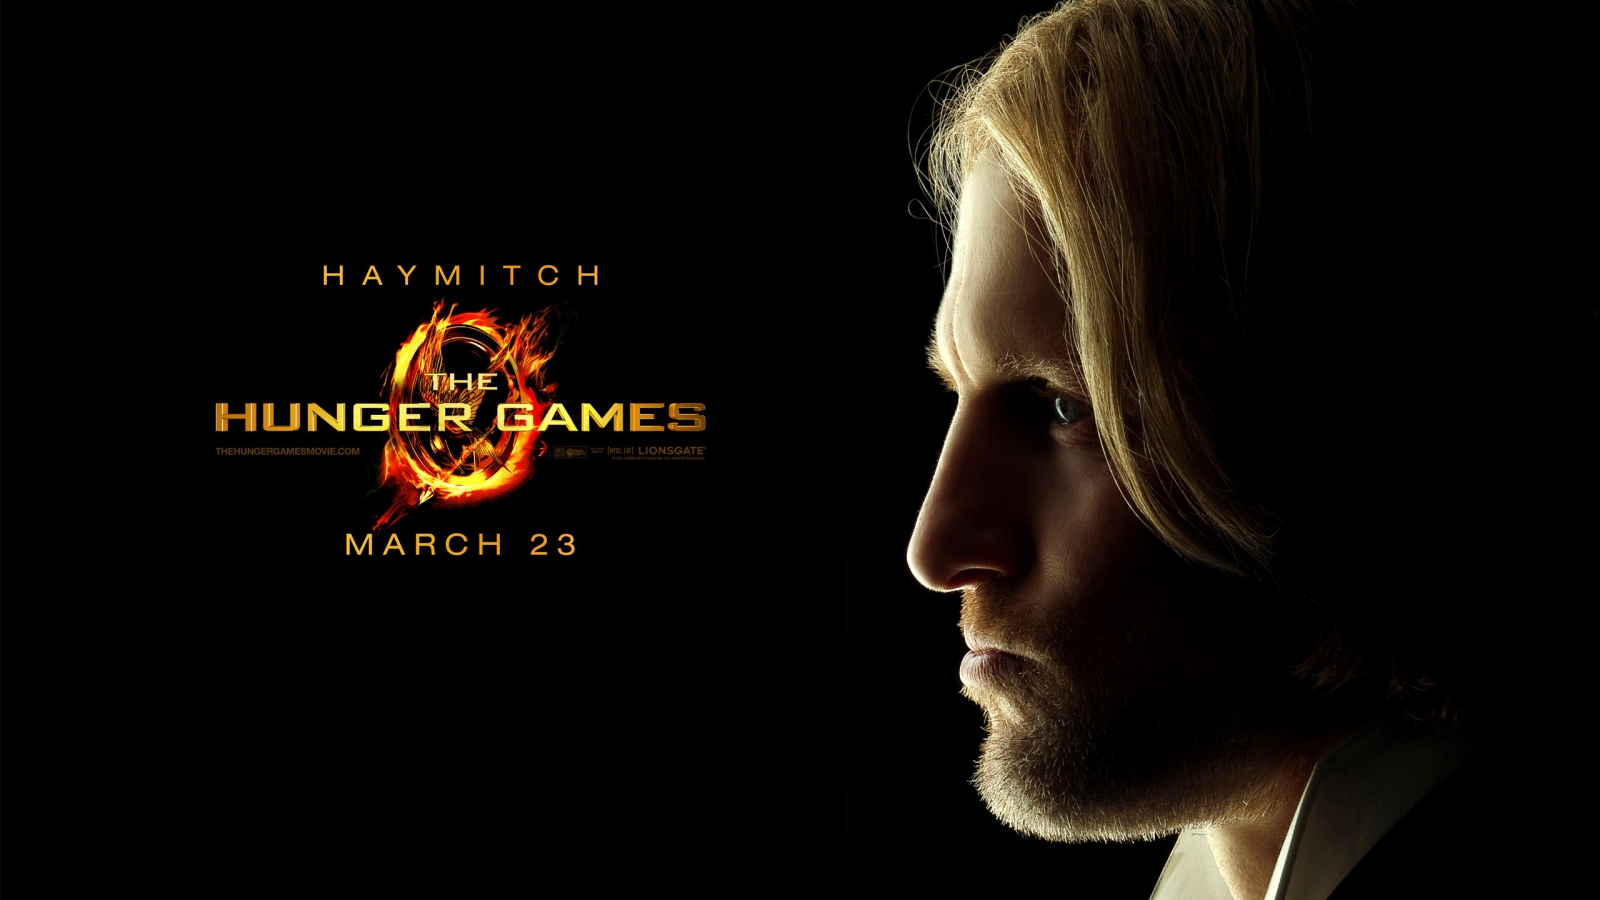 The Hunger Games Haymitch for 1600 x 900 HDTV resolution